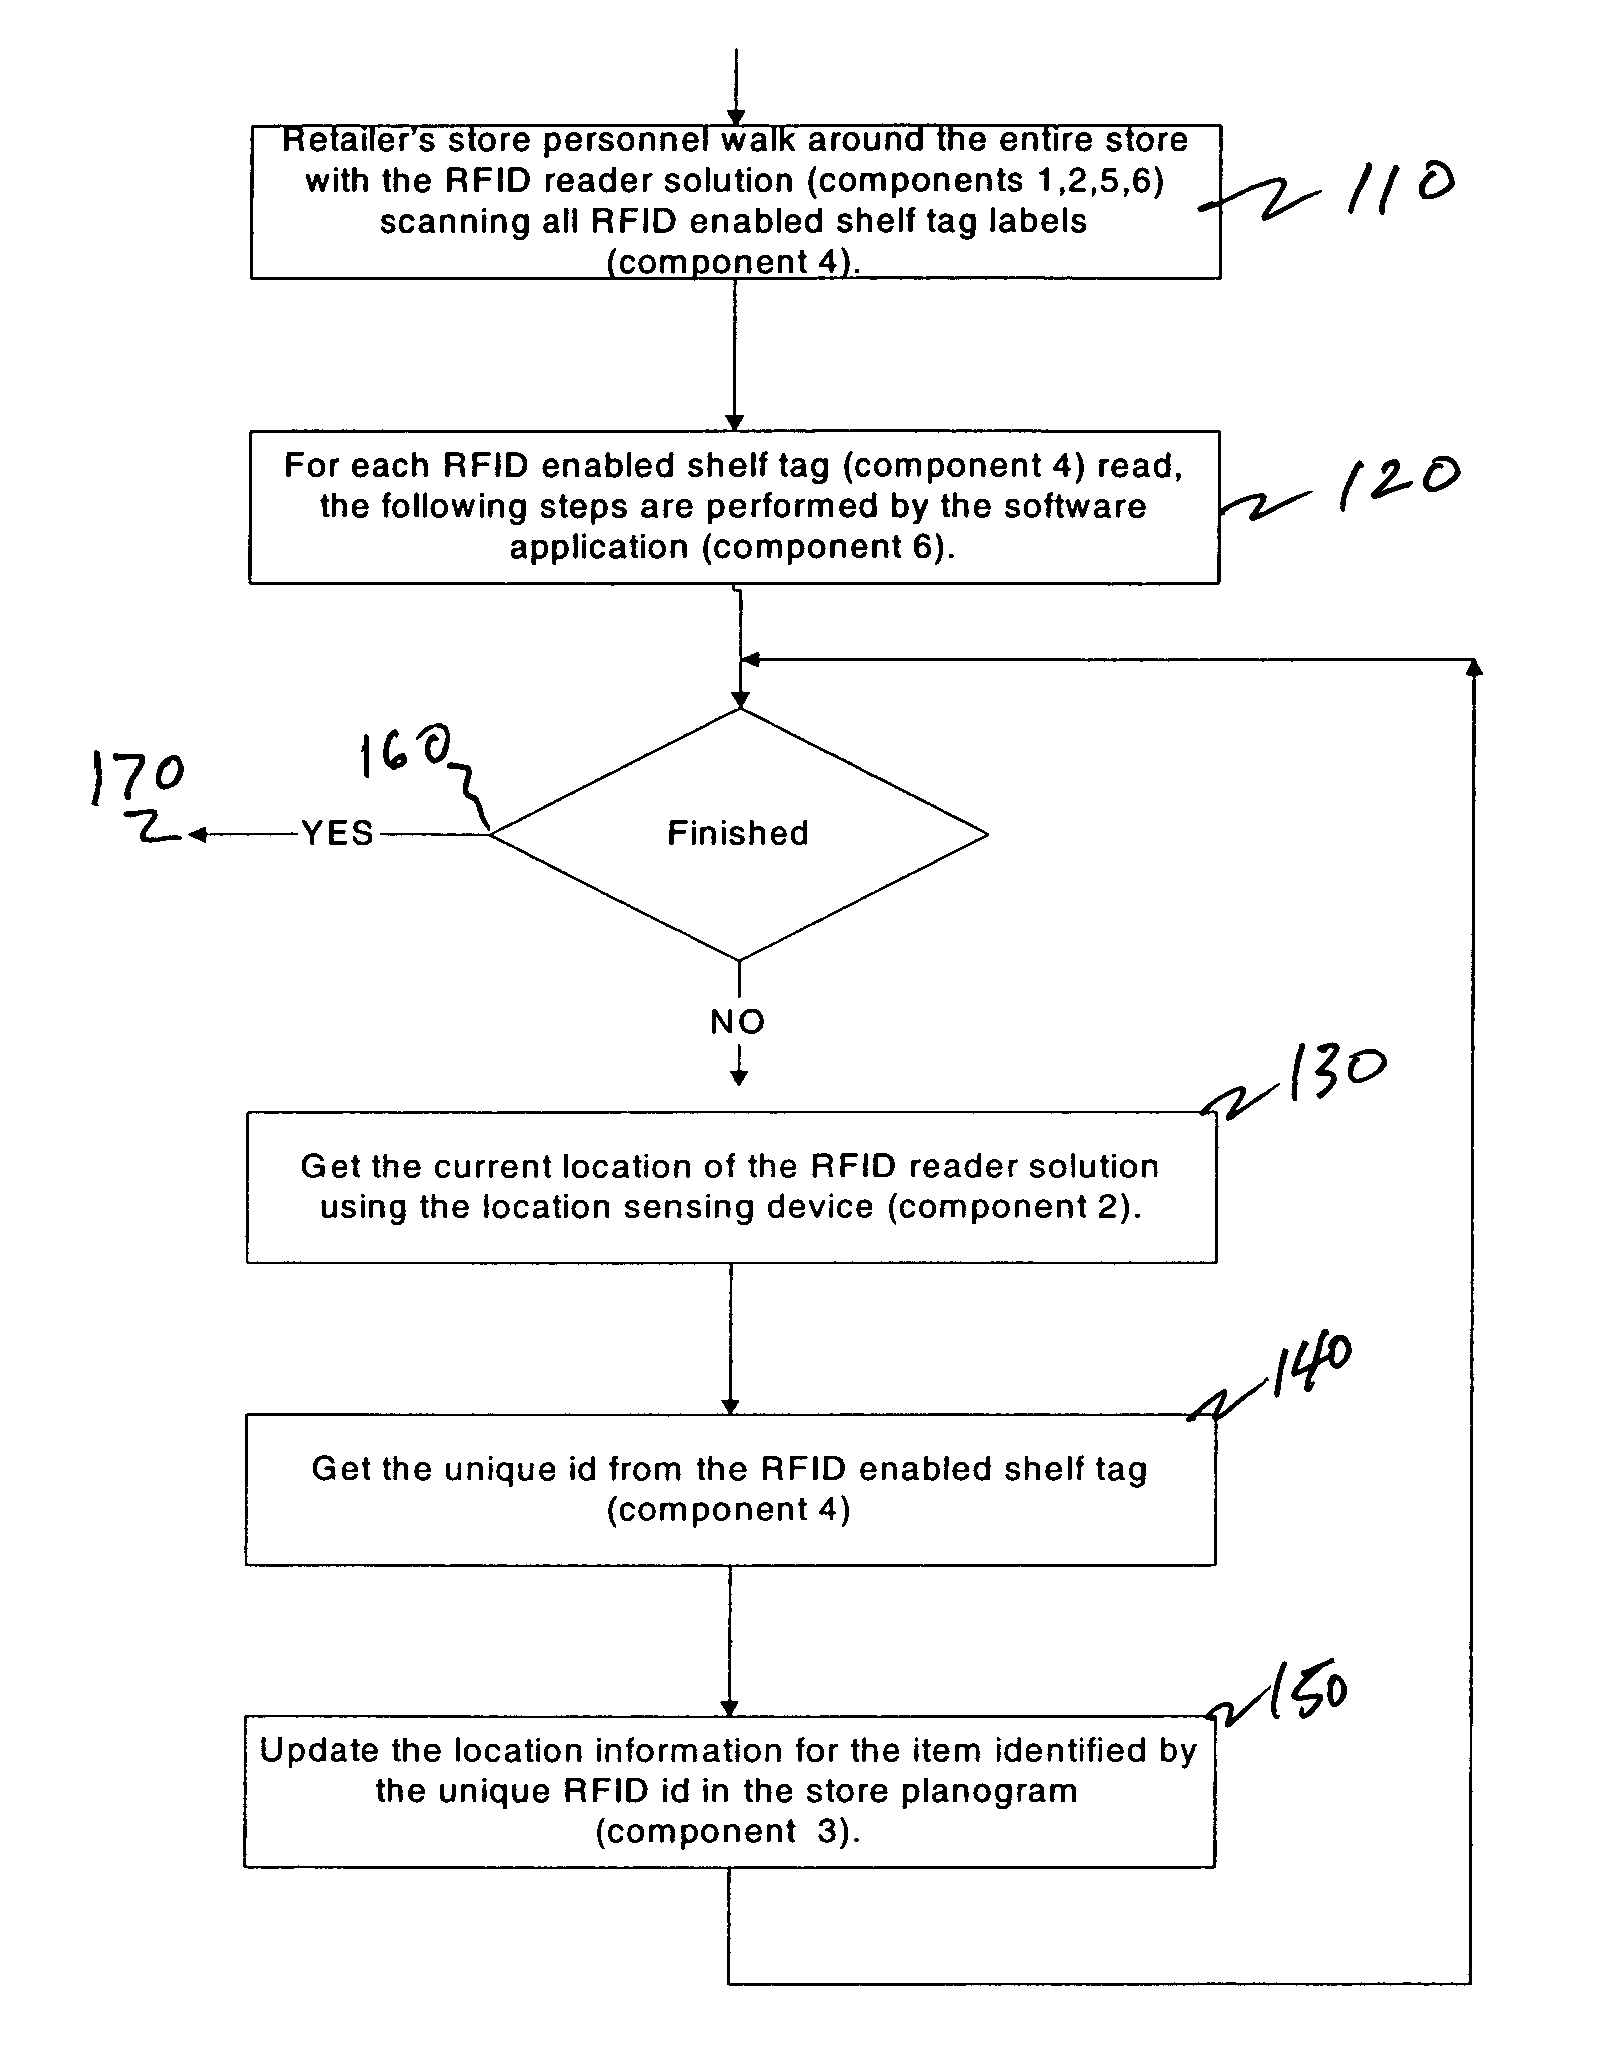 System and method of updating planogram information using RFID tags and personal shopping device